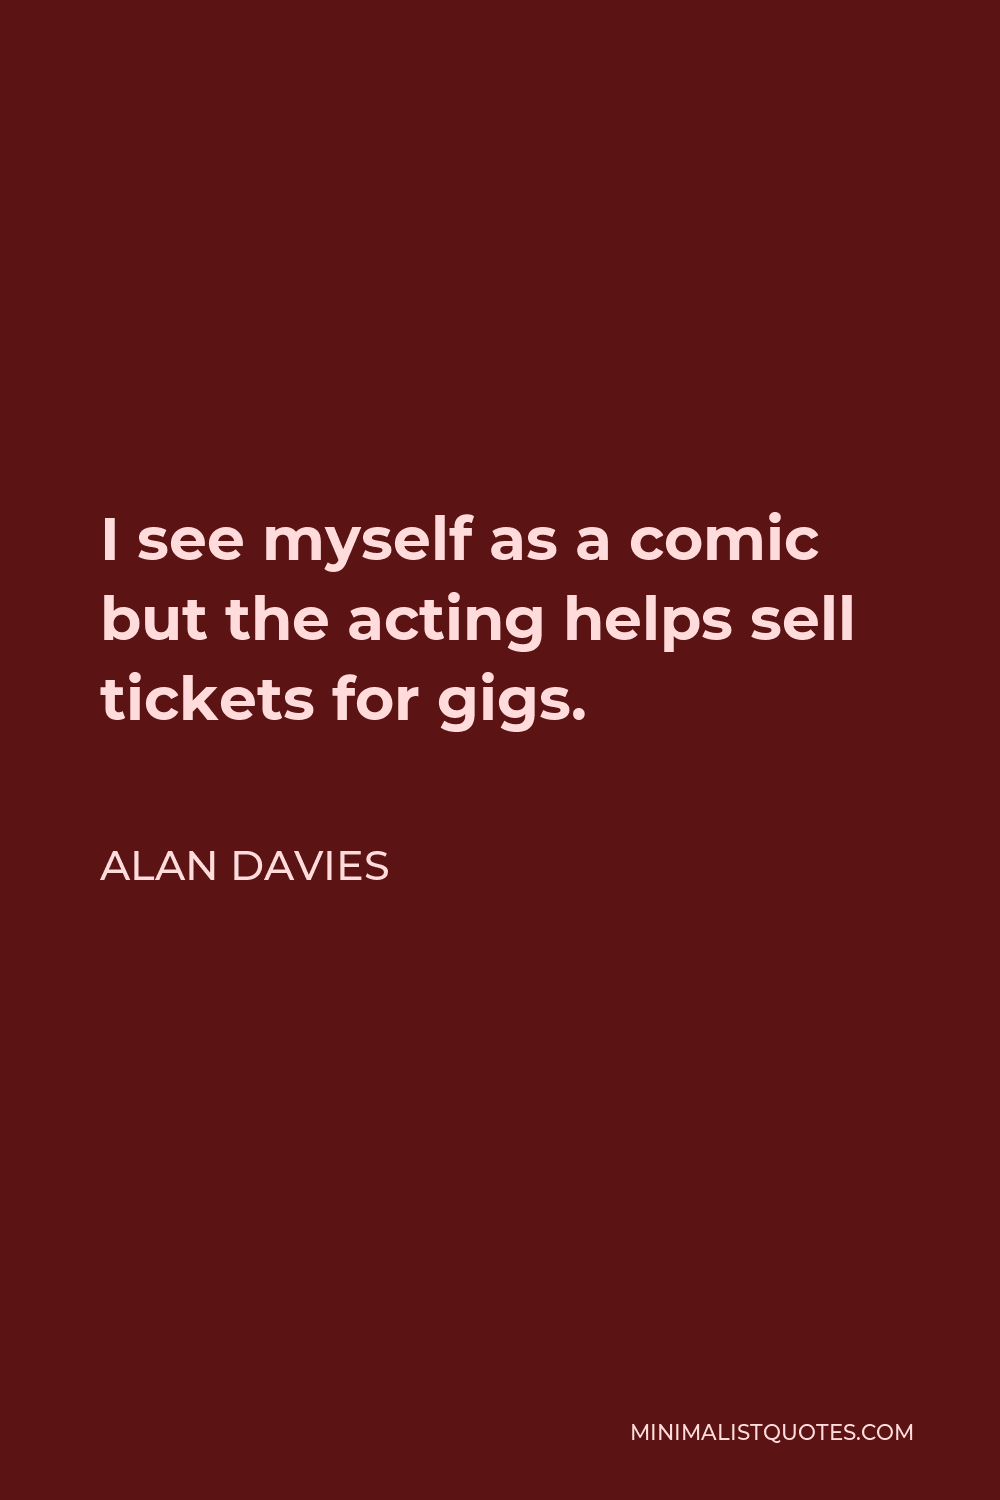 Alan Davies Quote - I see myself as a comic but the acting helps sell tickets for gigs.